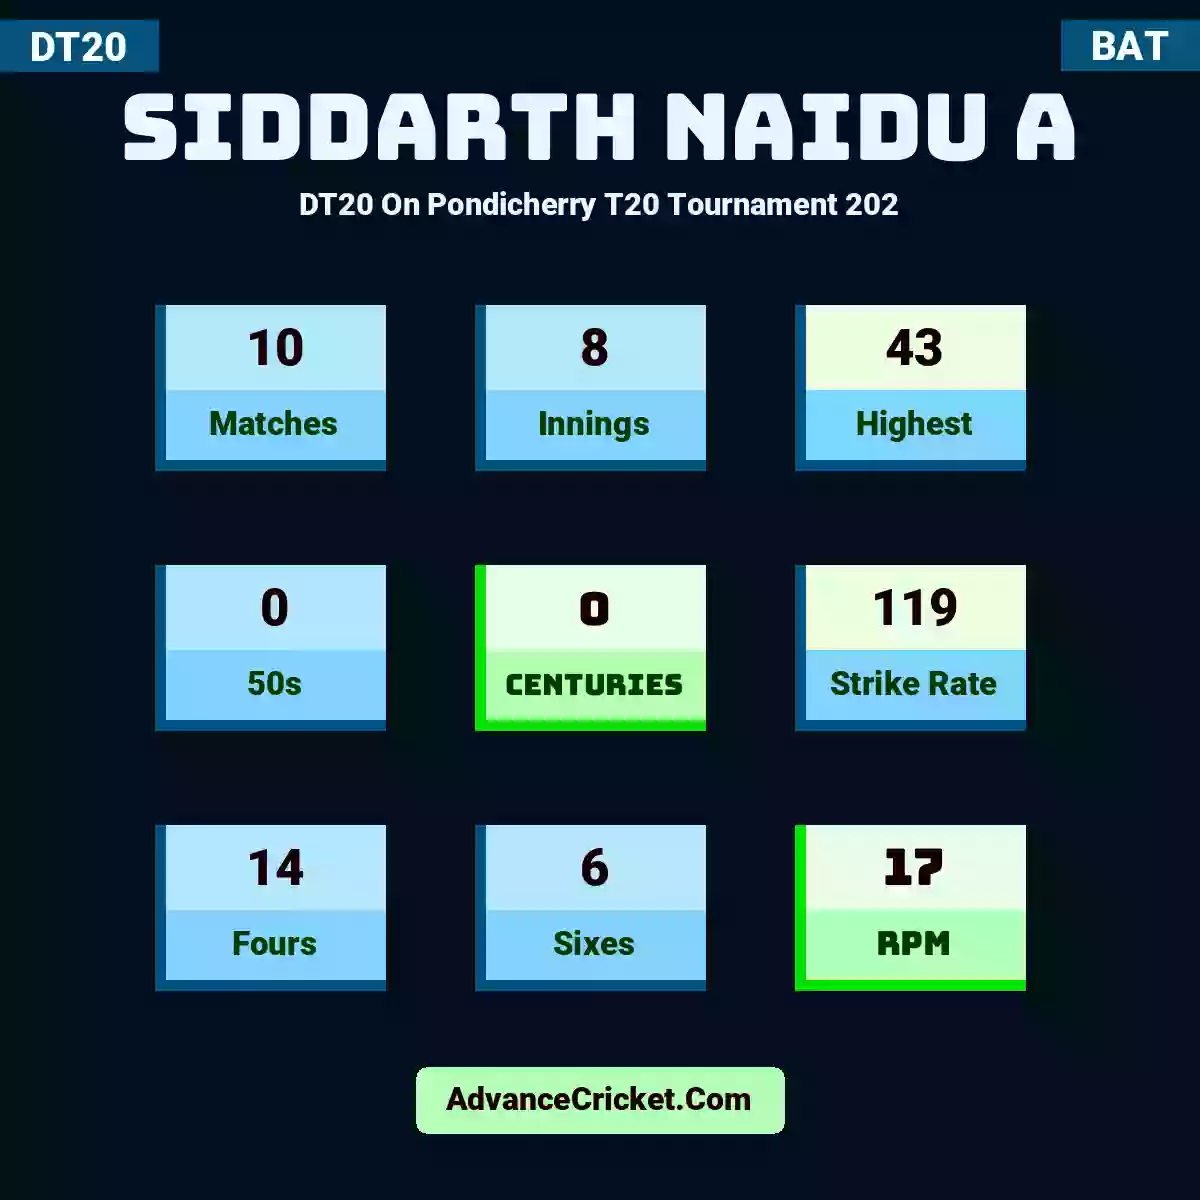 Siddarth Naidu A DT20  On Pondicherry T20 Tournament 202, Siddarth Naidu A played 10 matches, scored 43 runs as highest, 0 half-centuries, and 0 centuries, with a strike rate of 119. S.Naidu.A hit 14 fours and 6 sixes, with an RPM of 17.